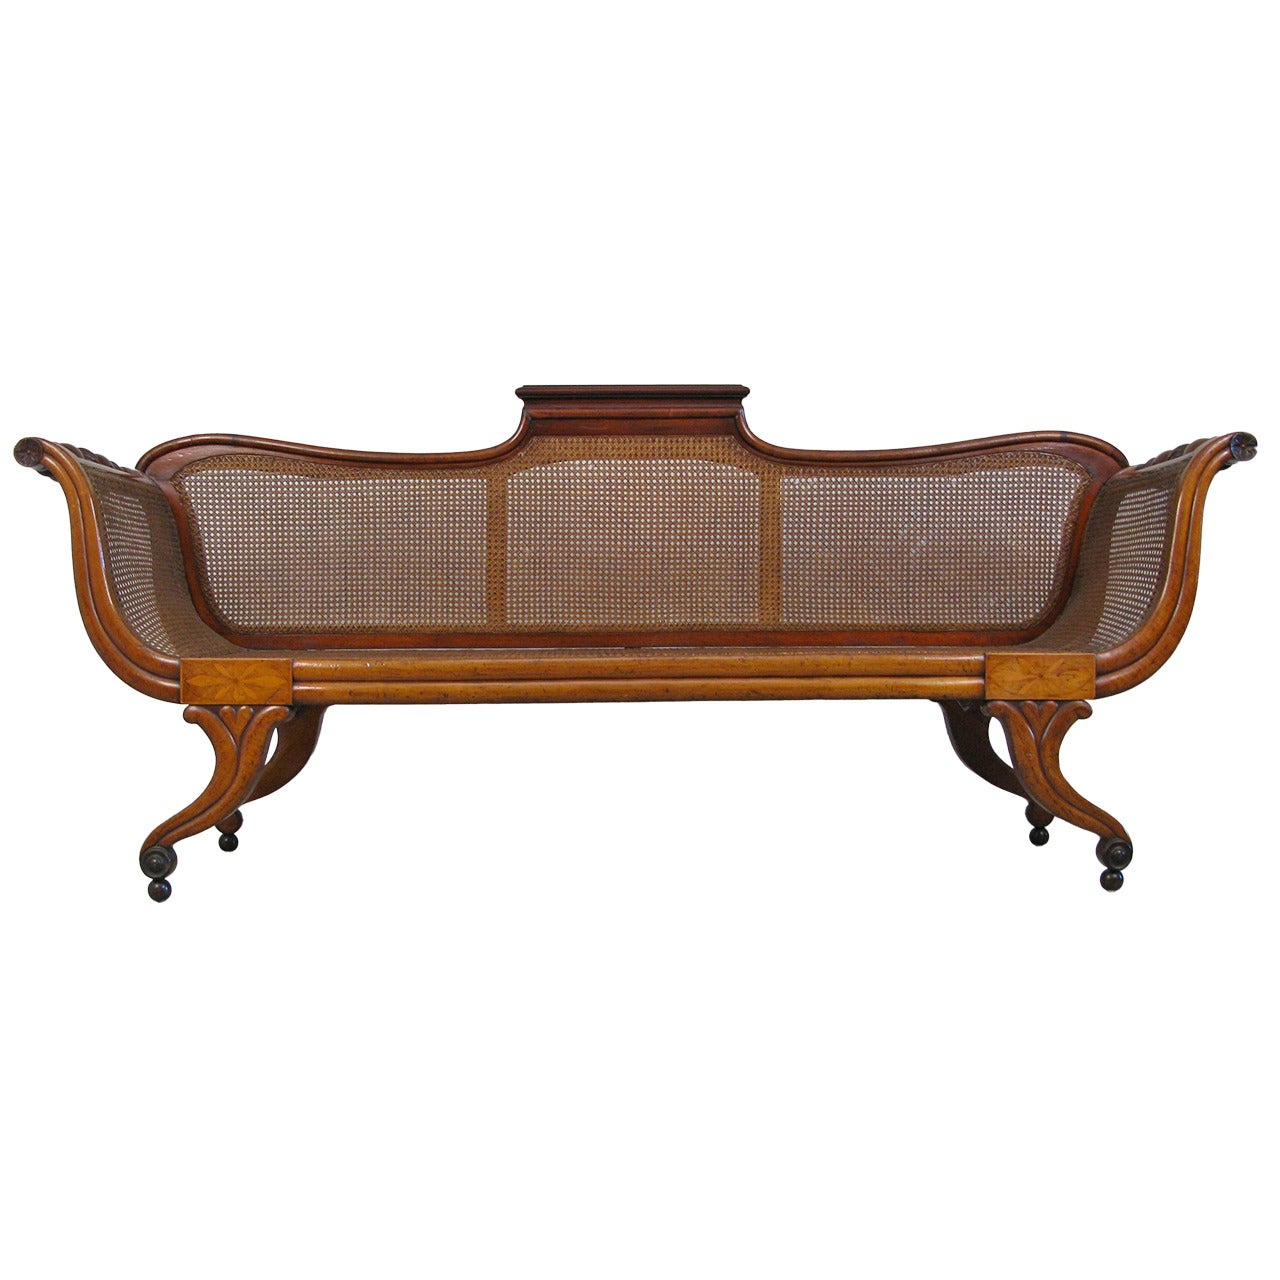 Spectacular 19th Century Anglo-Caribbean Caned Settee